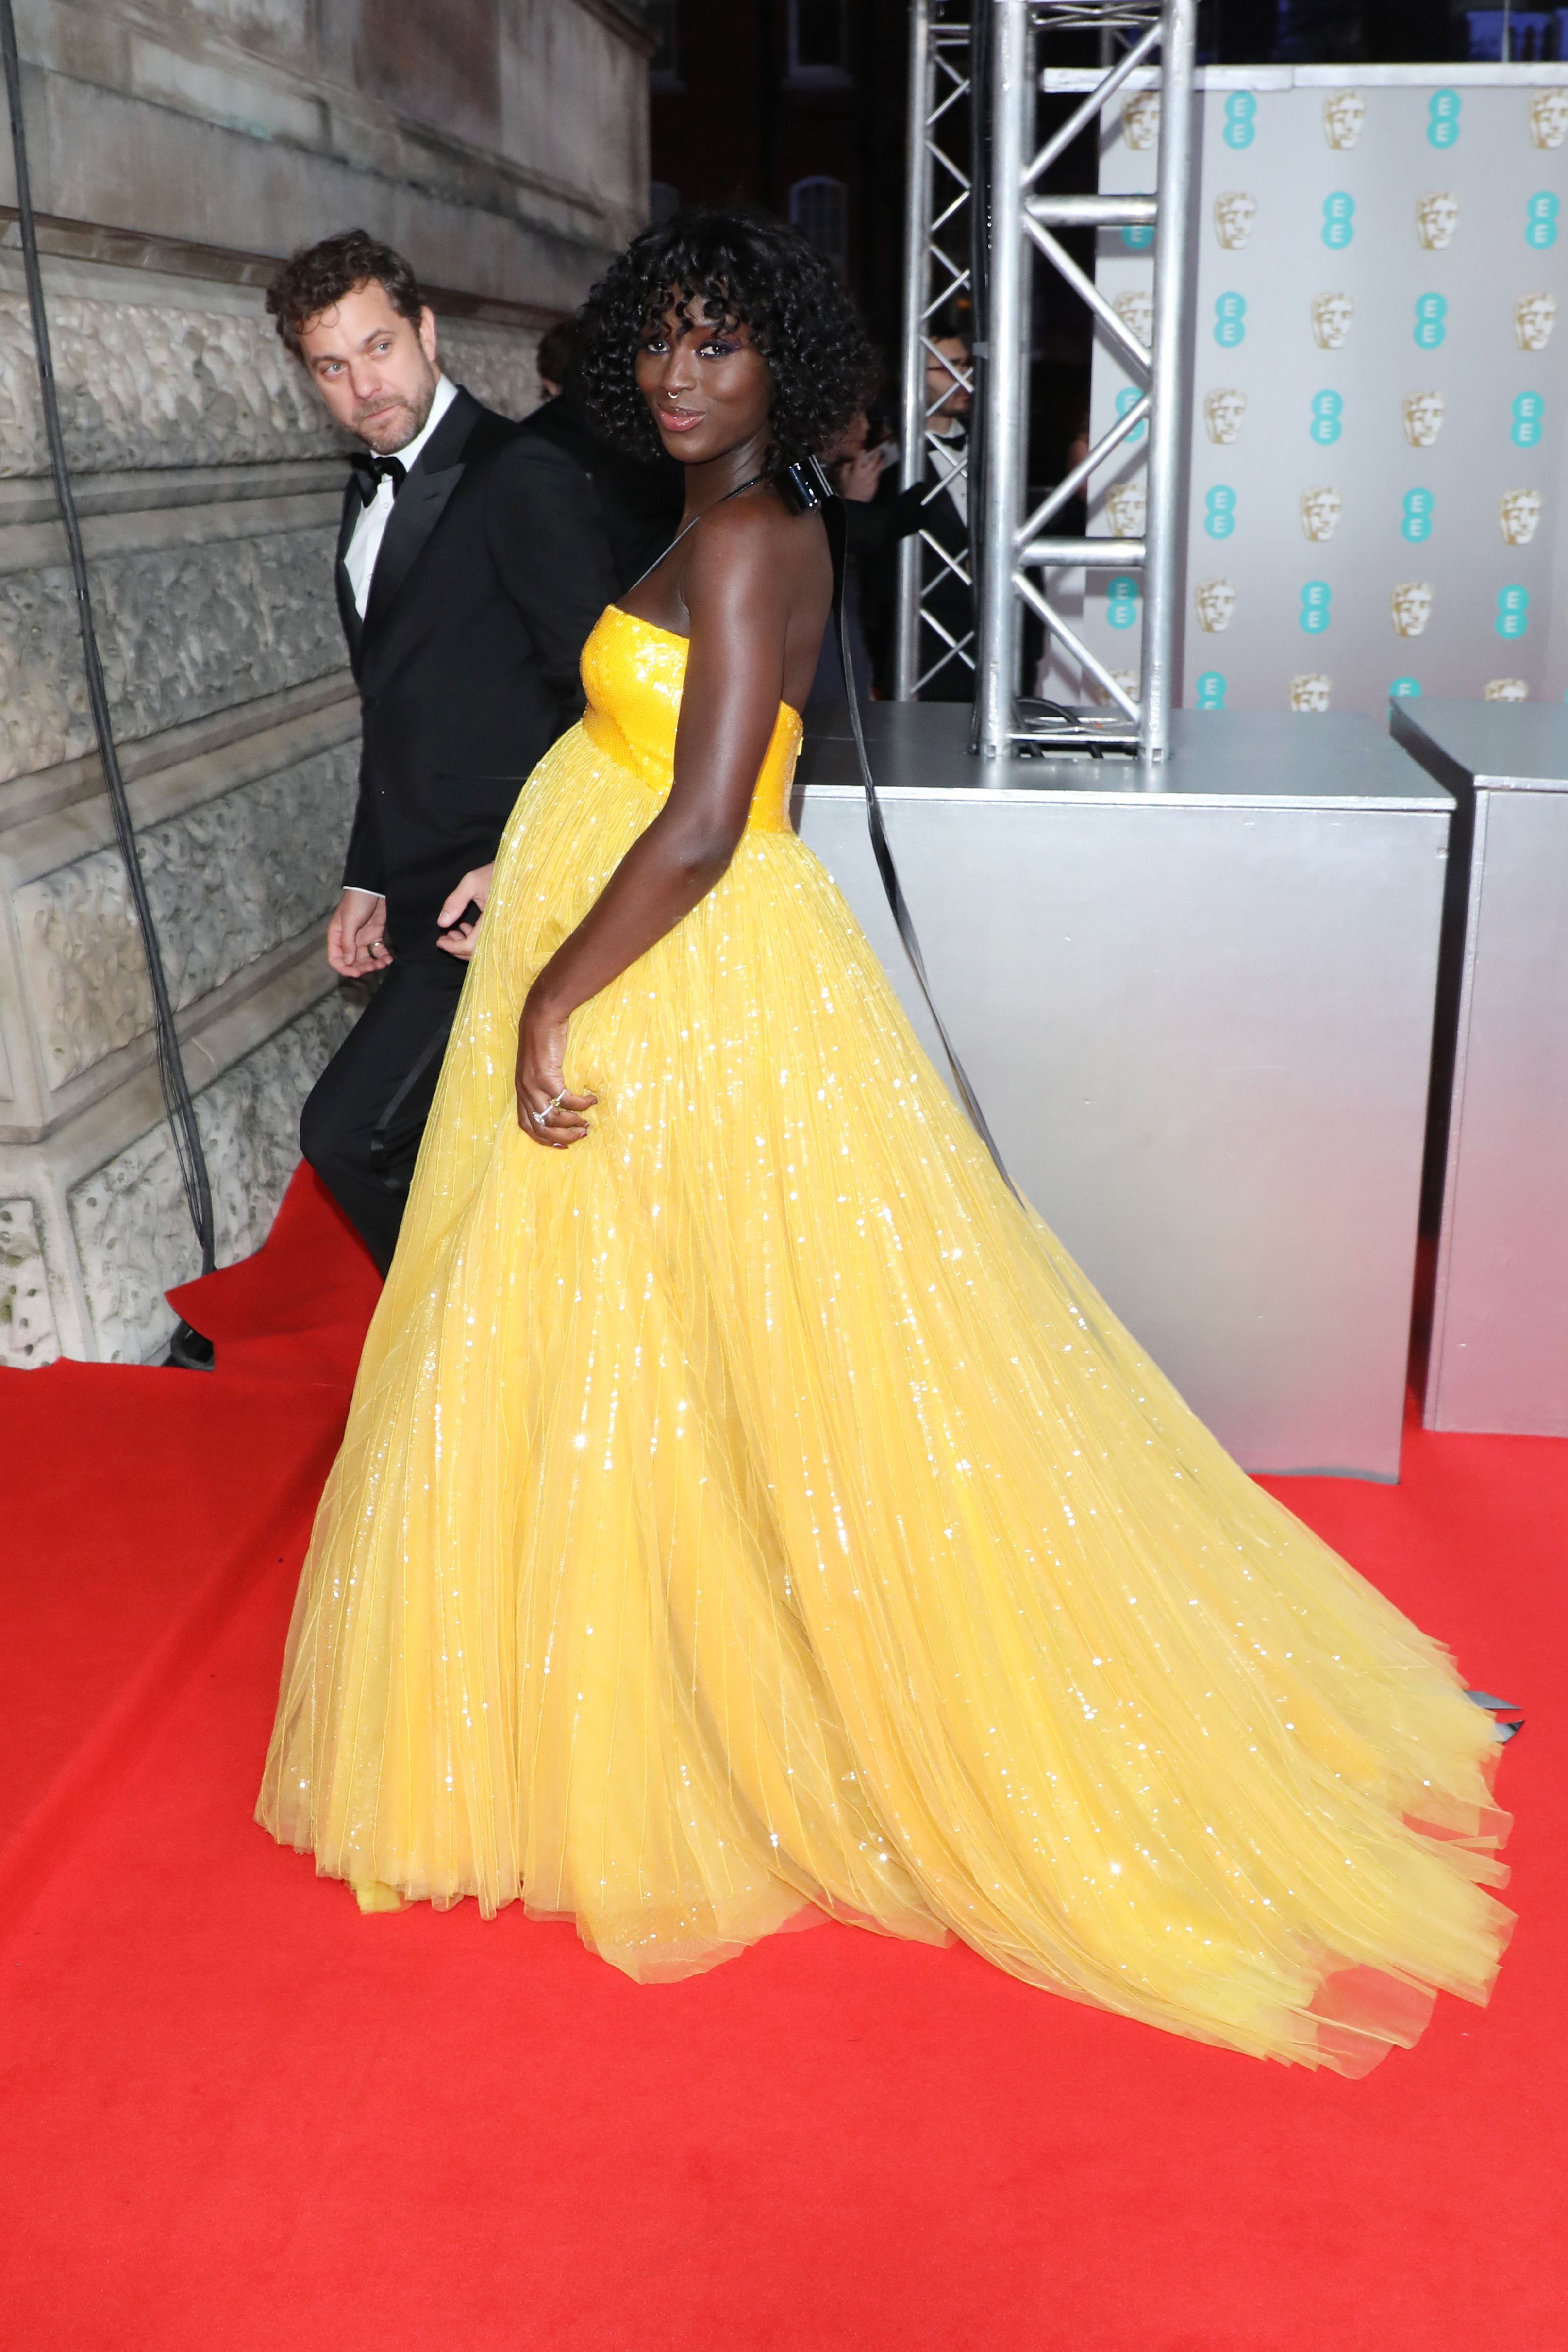 Joshua Jackson and Jodie Turner-Smith attends the EE British Academy Film Awards 2020 at Royal Albert Hall on February 02, 2020 in London, England. | Source: Getty Images